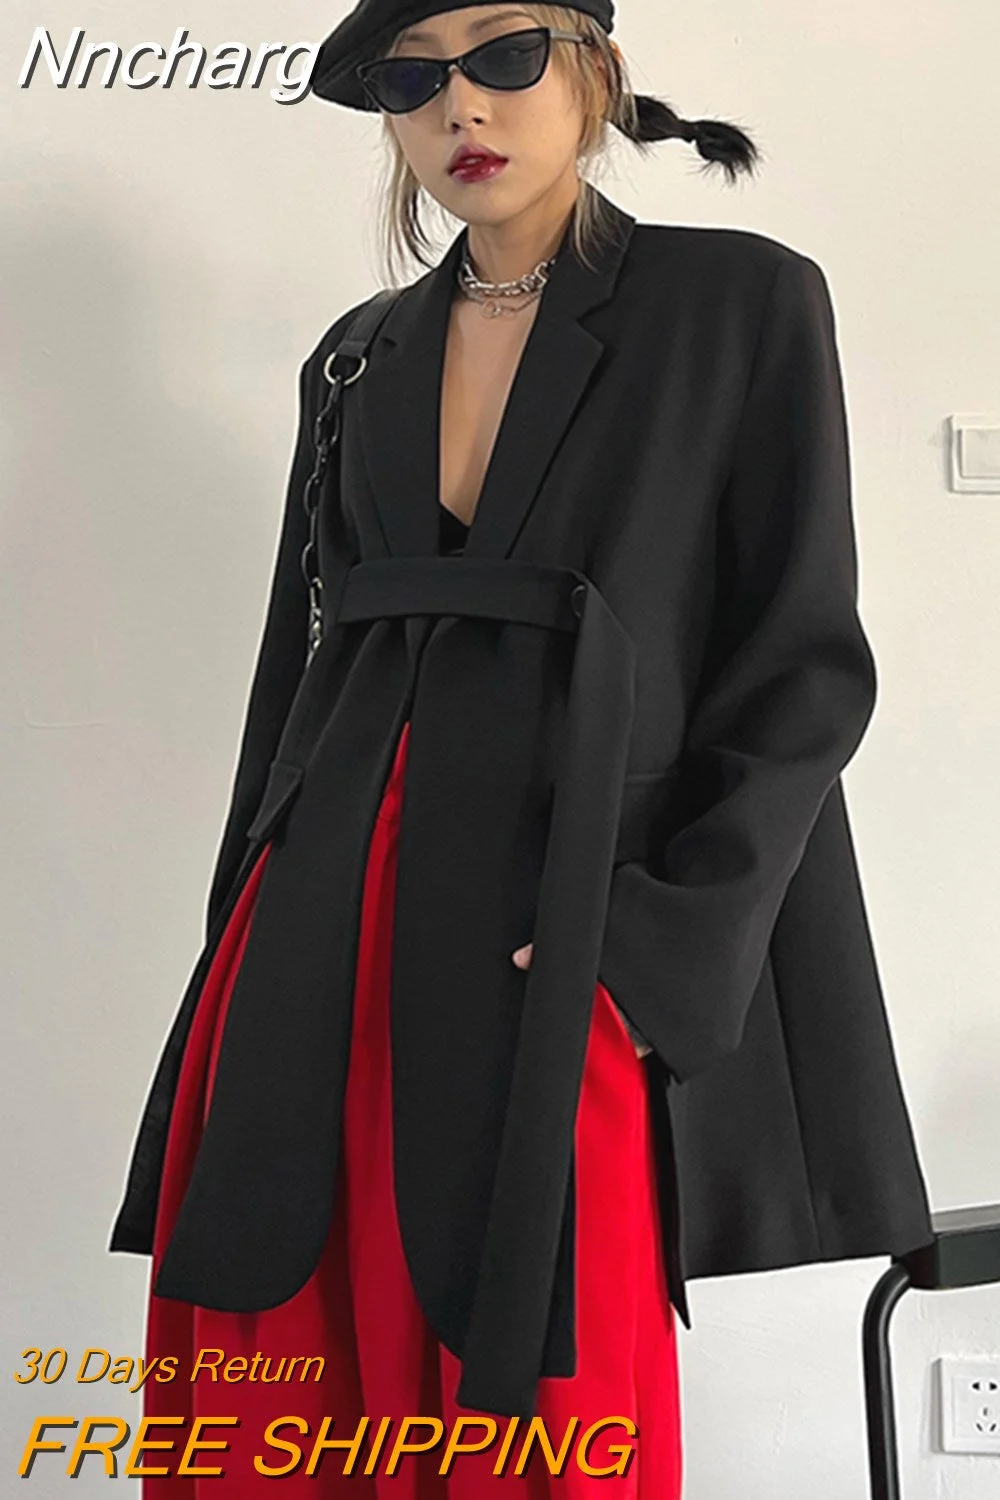 Nncharge Side Split Black Blazer For Women Notched Collar Long Sleeve Solid Minimalist Blazers Female Spring Clothes Fashion